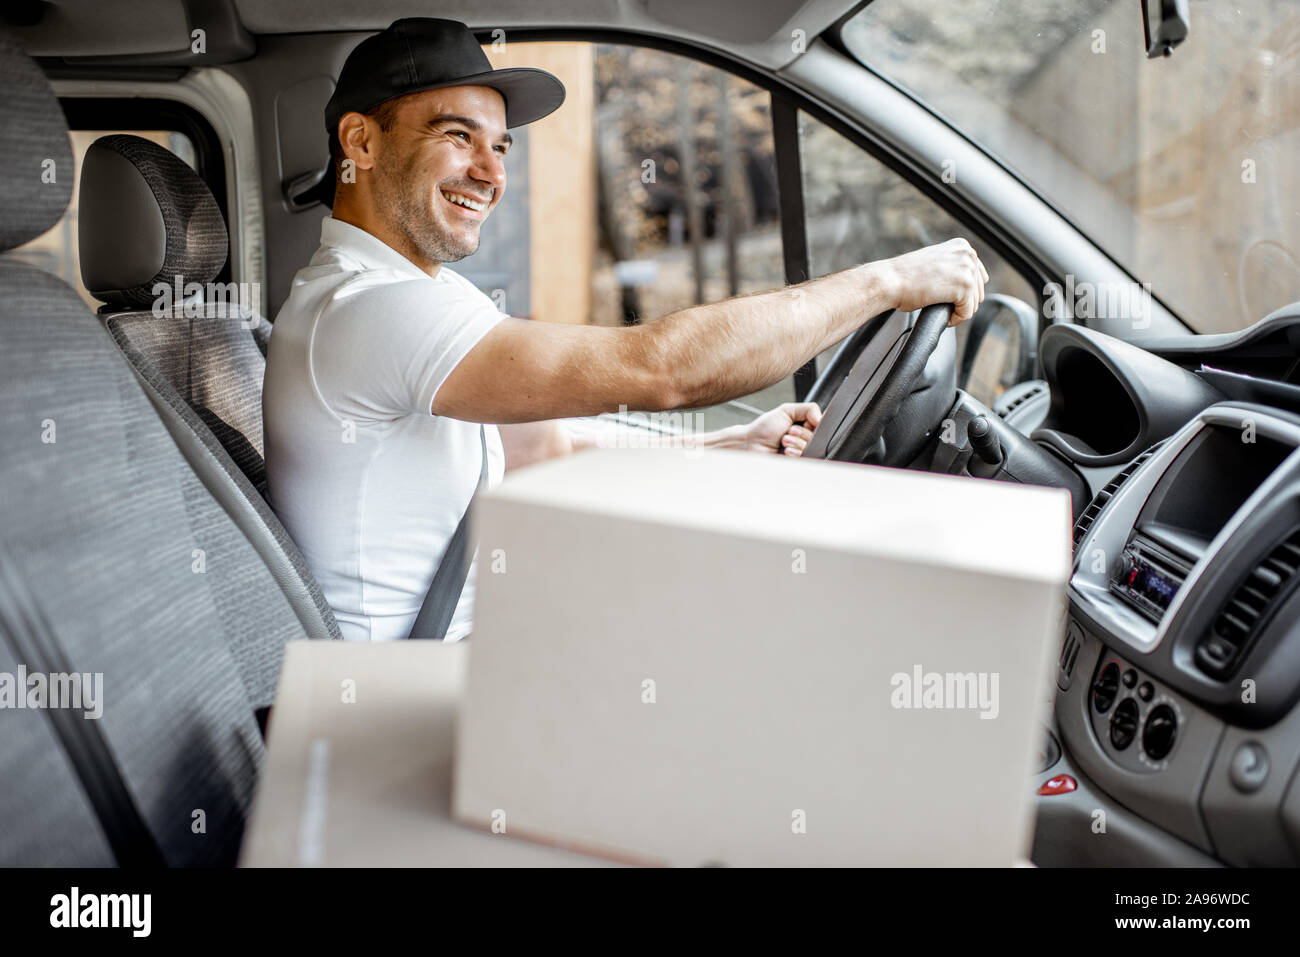 Delivery man driving cargo vehicle with parcels on the passenger seat, vehicle interior view on the boxes with blank space Stock Photo